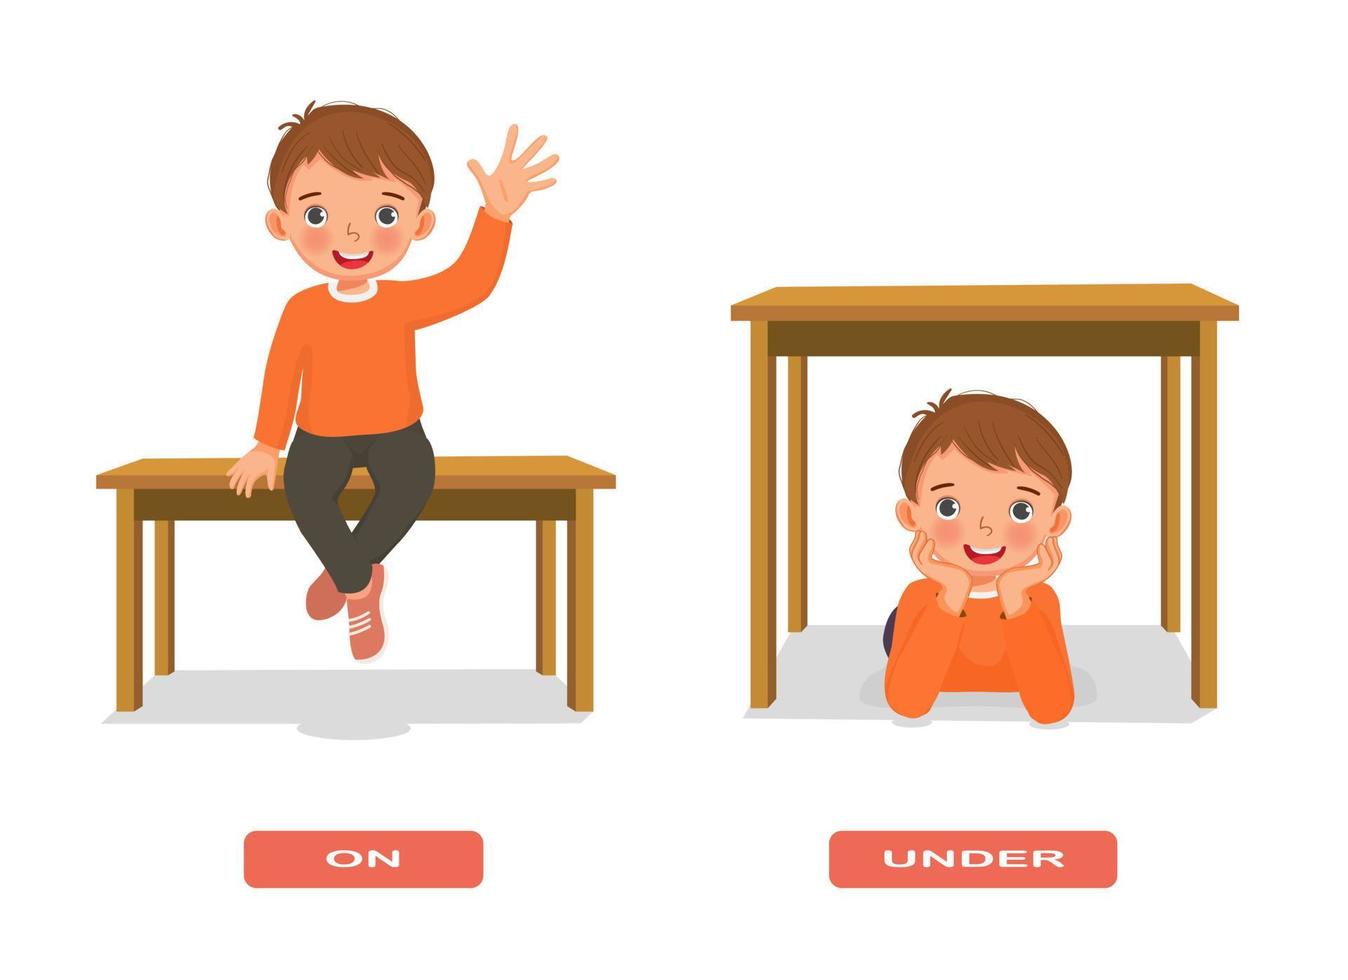 Preposition of place illustration little boy sitting on and under the table English vocabulary words flashcard set for education vector